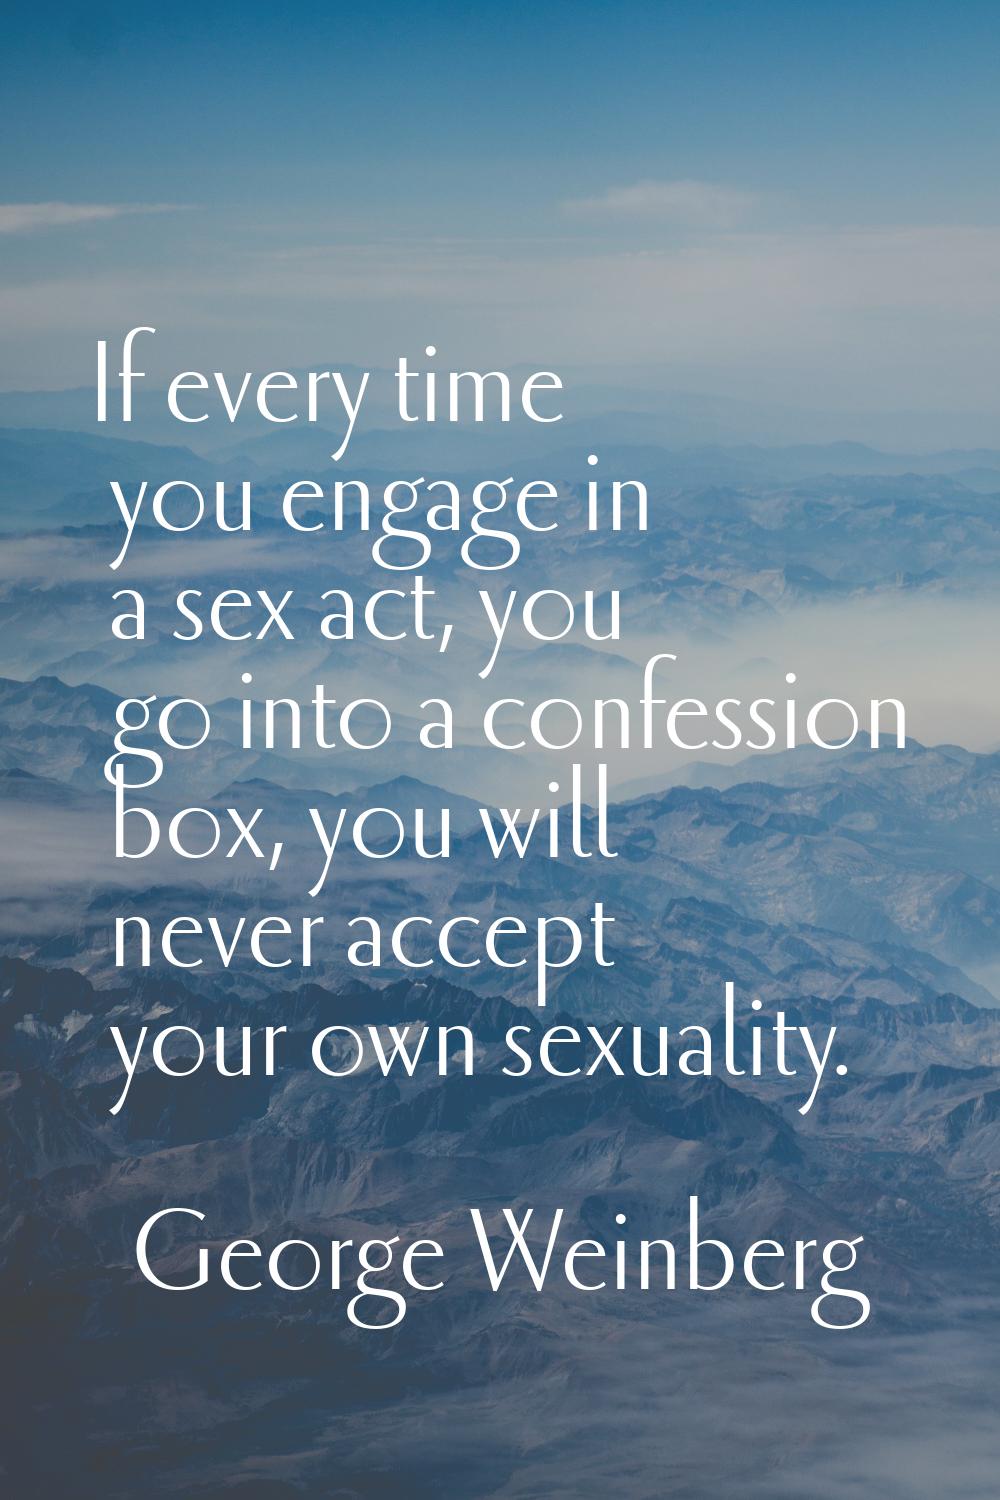 If every time you engage in a sex act, you go into a confession box, you will never accept your own